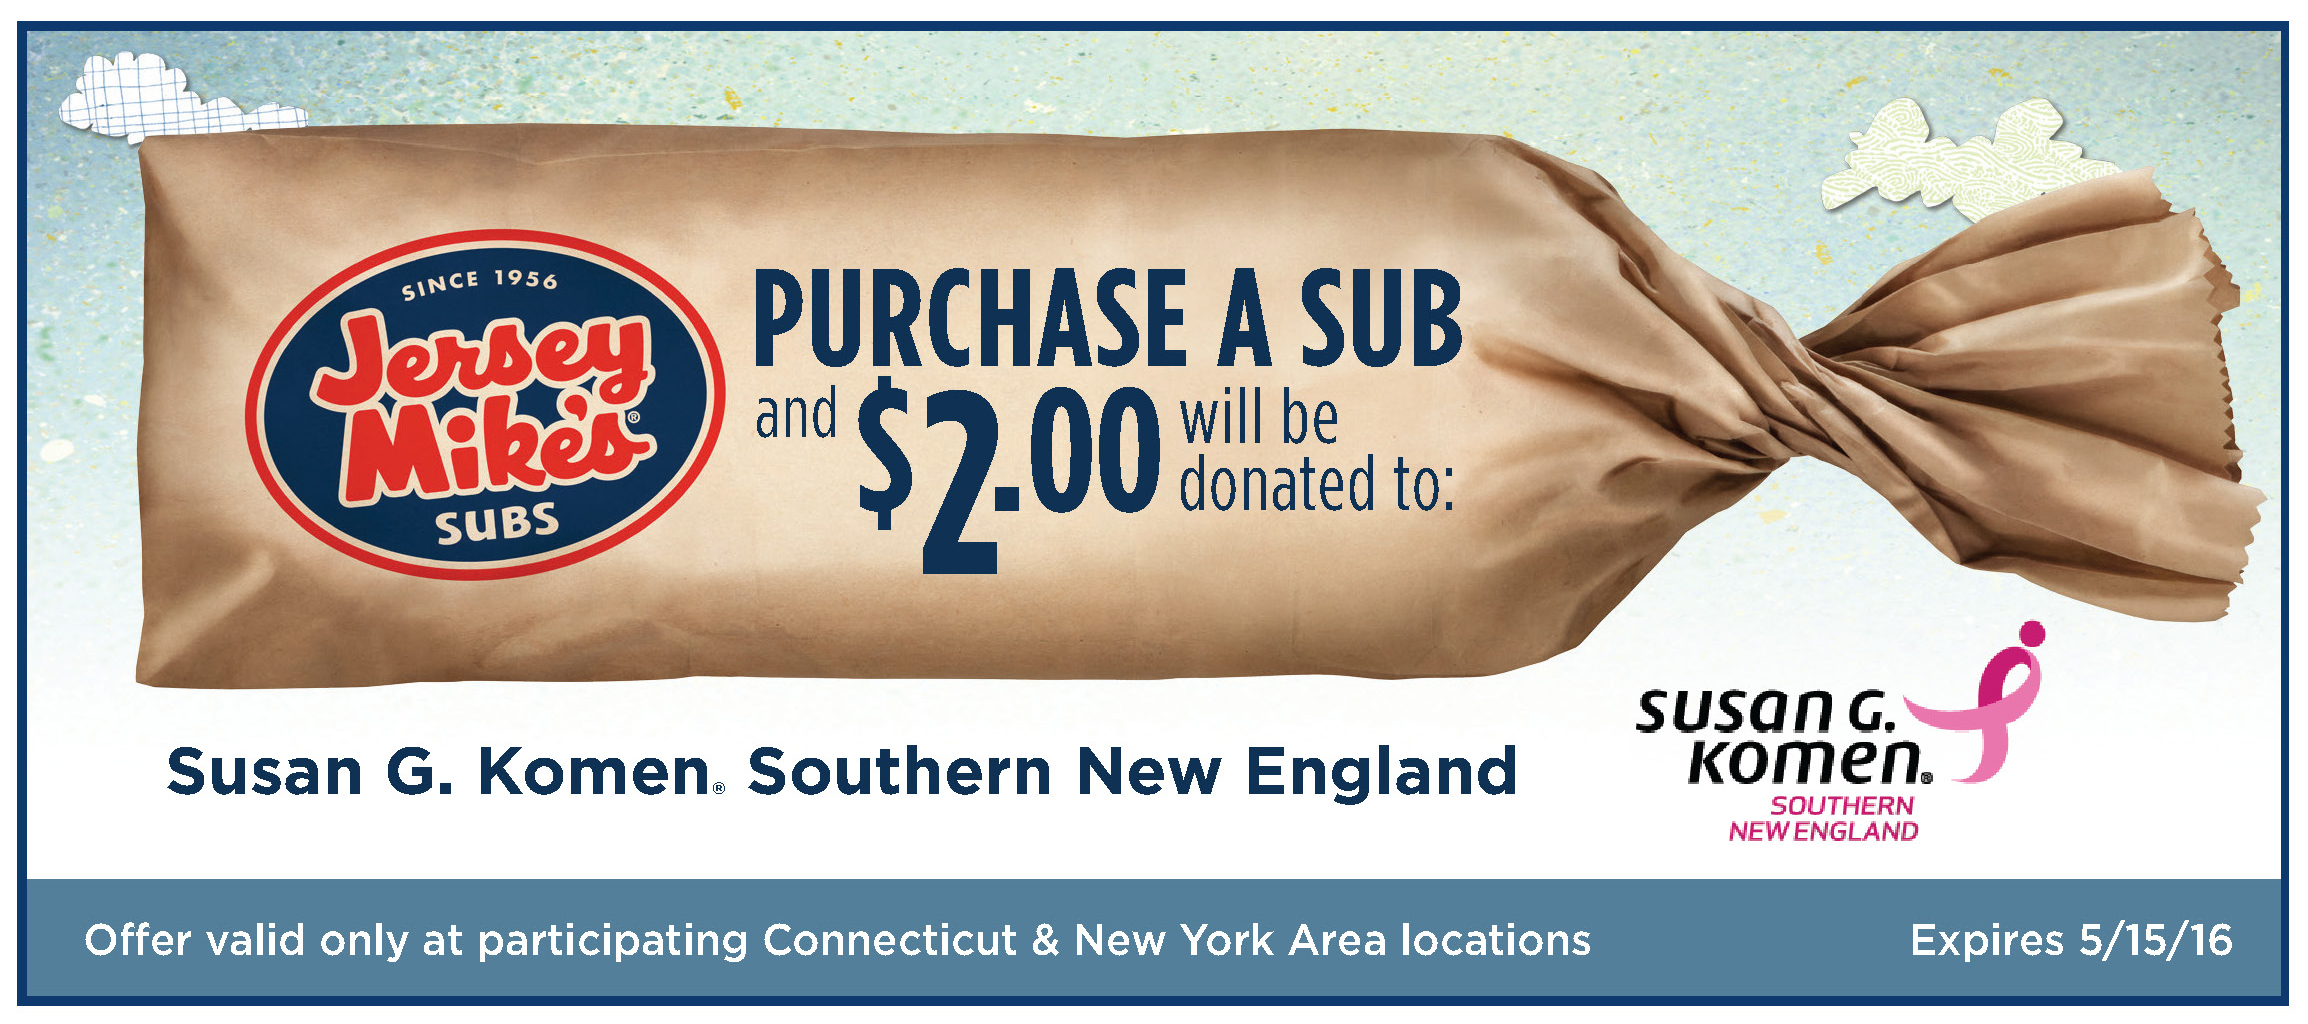 Jersey Mike's Subs Shops to Donate $2 